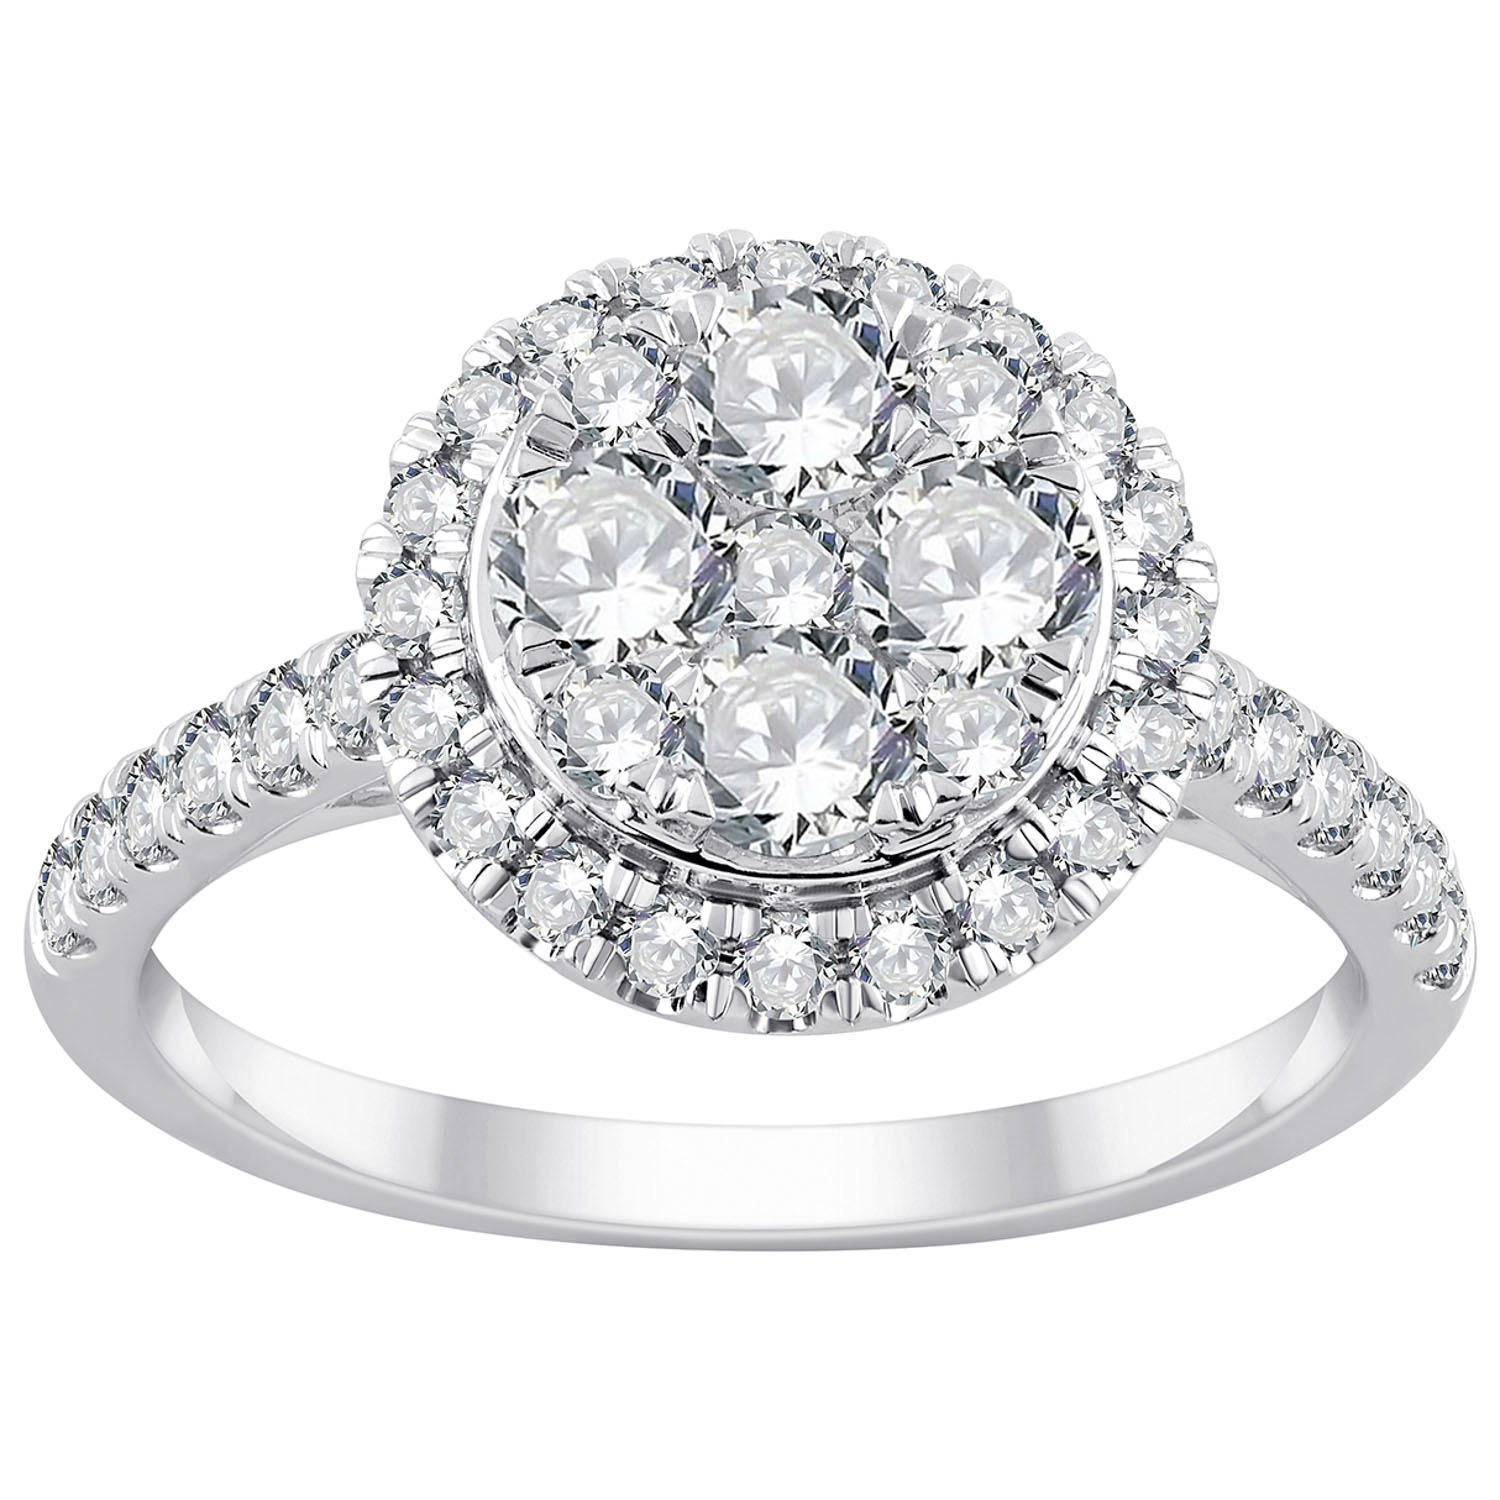 1.20 CT. T.W. Round Halo Diamond Engagement Ring in 14k White Gold, 5